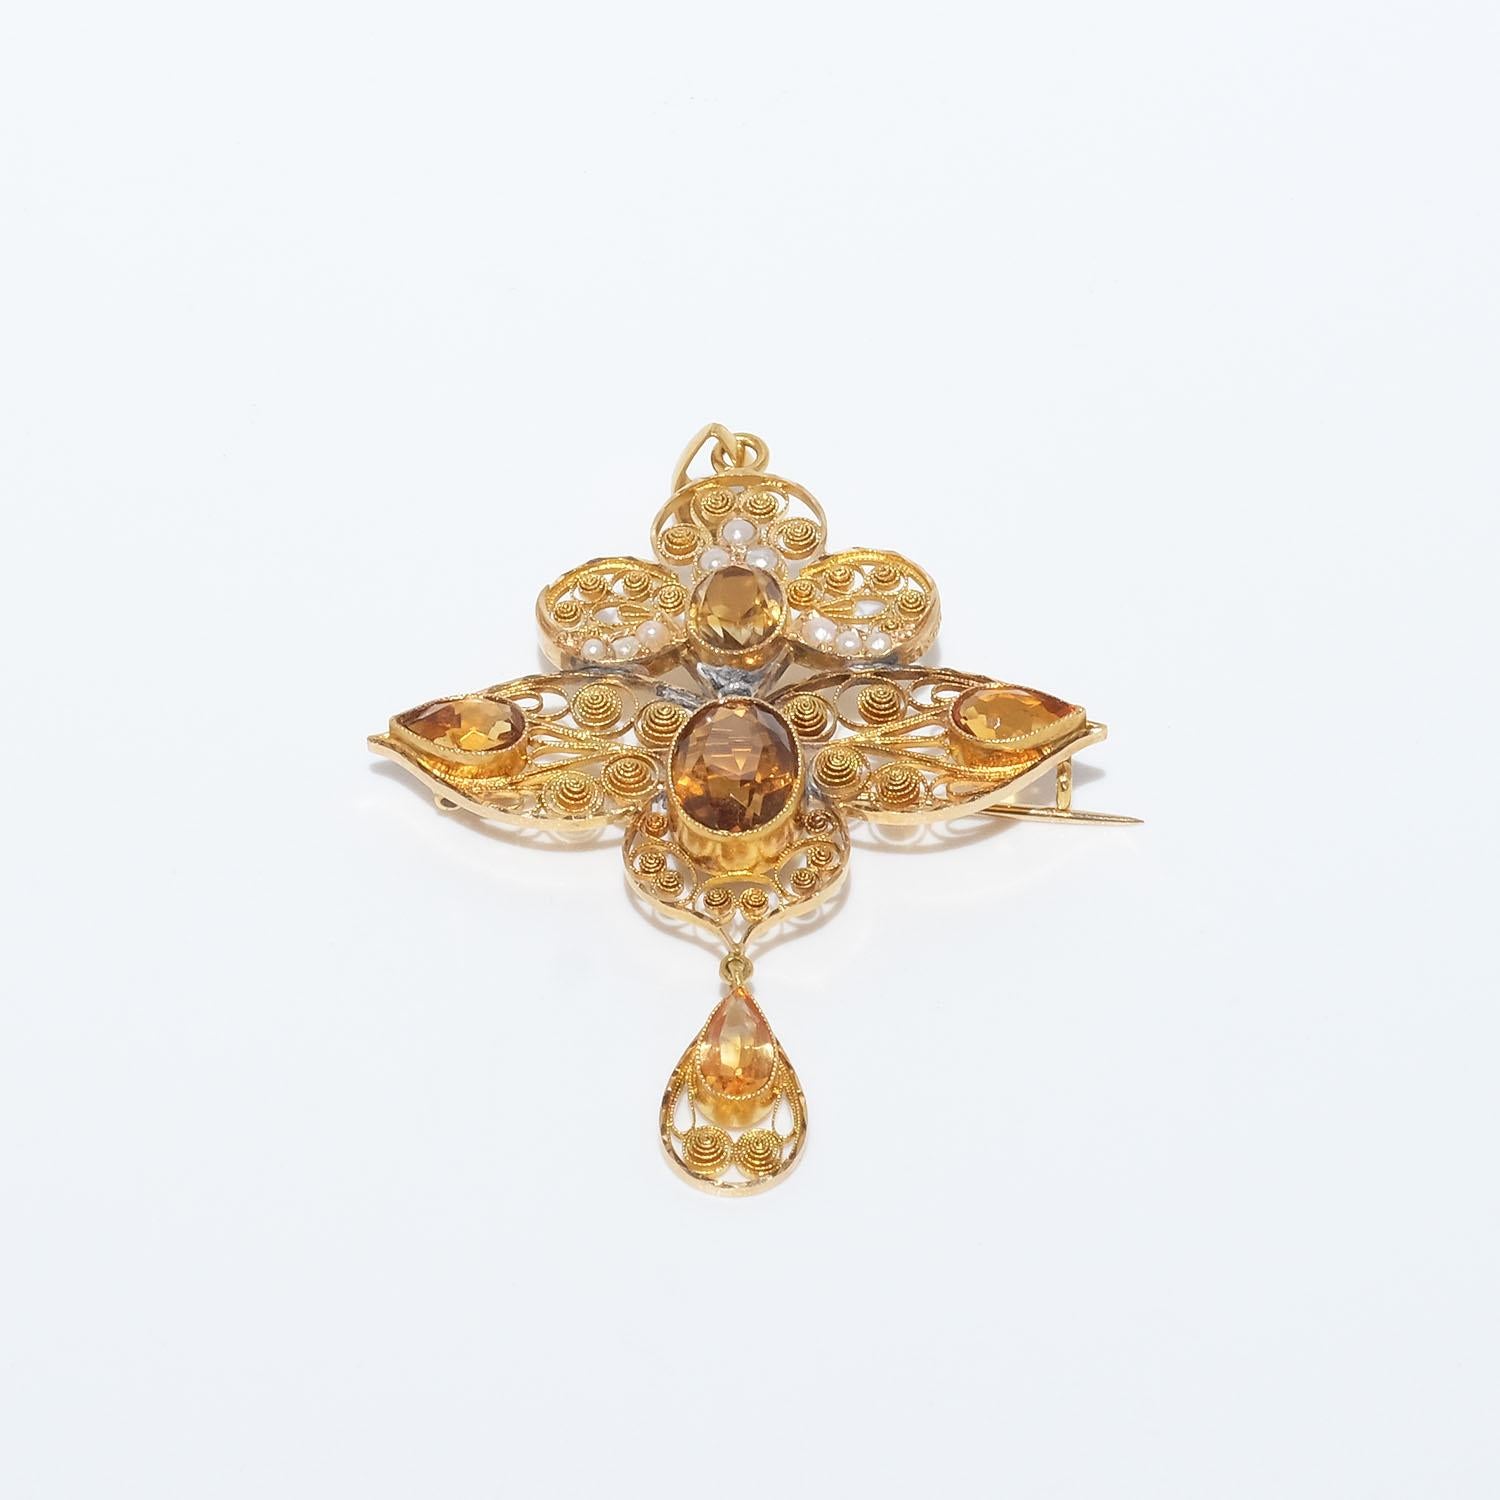 18k Gold, Citrine and Seed Bead Brooch/Pendant Made Year 1915 For Sale 3